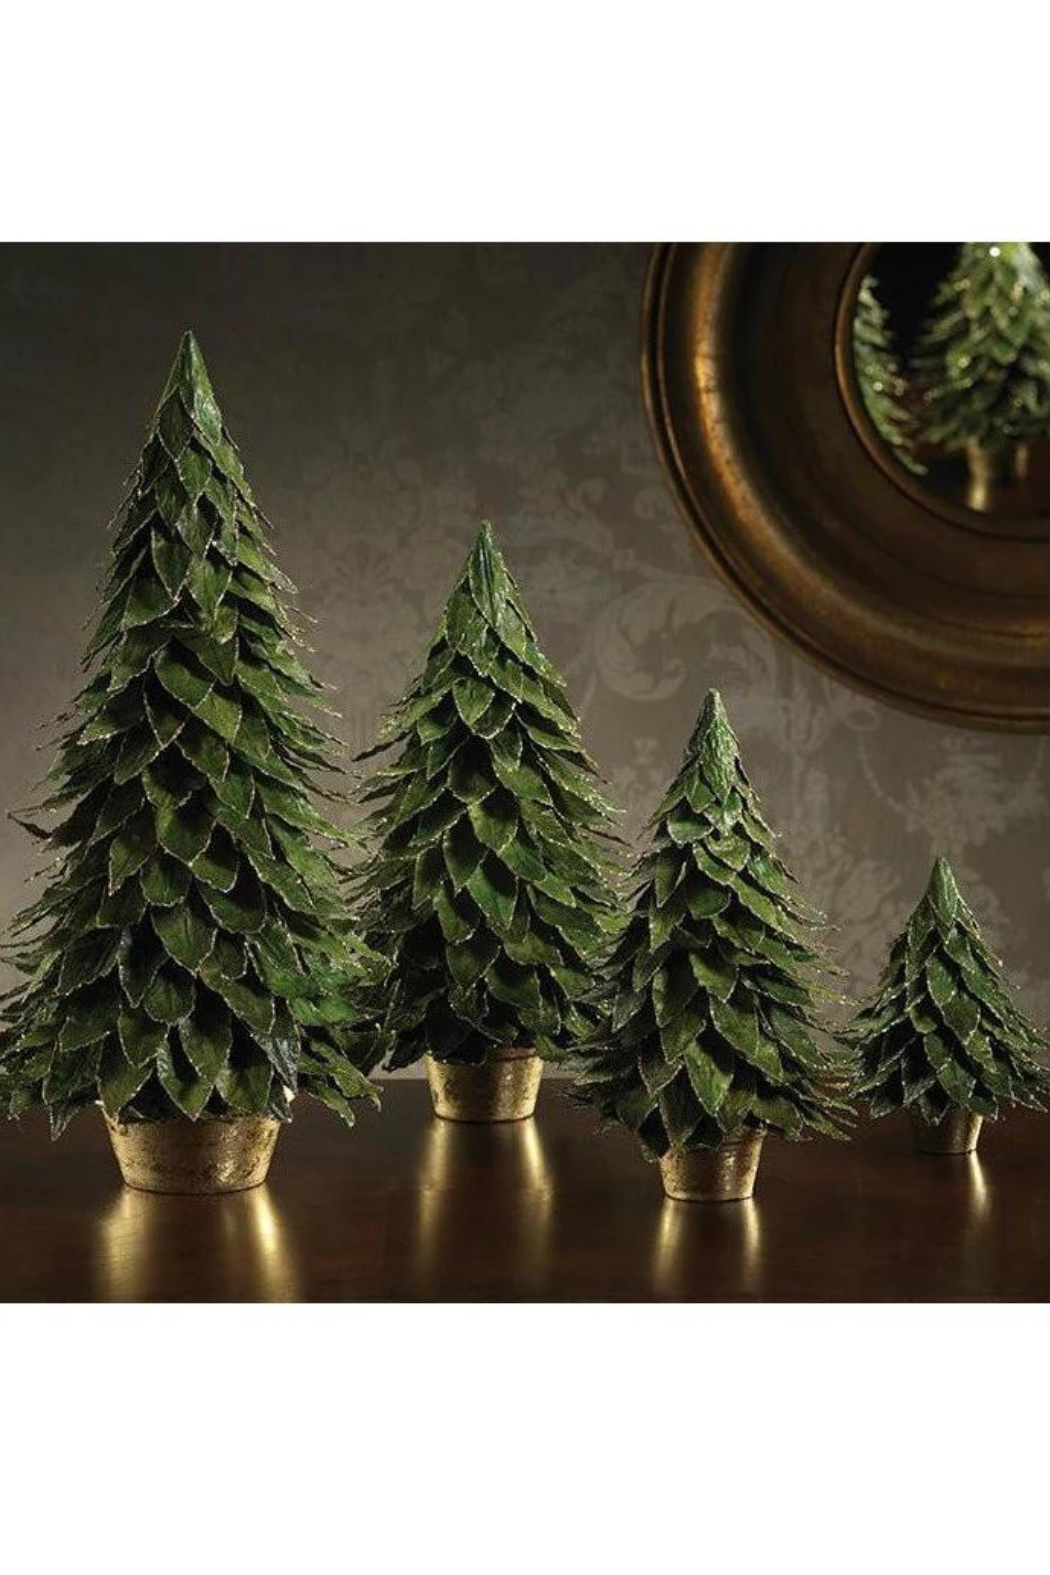 Zodax 10 Tall Ceramic Christmas Tabletop Decoration, White (Set of 4) Trees